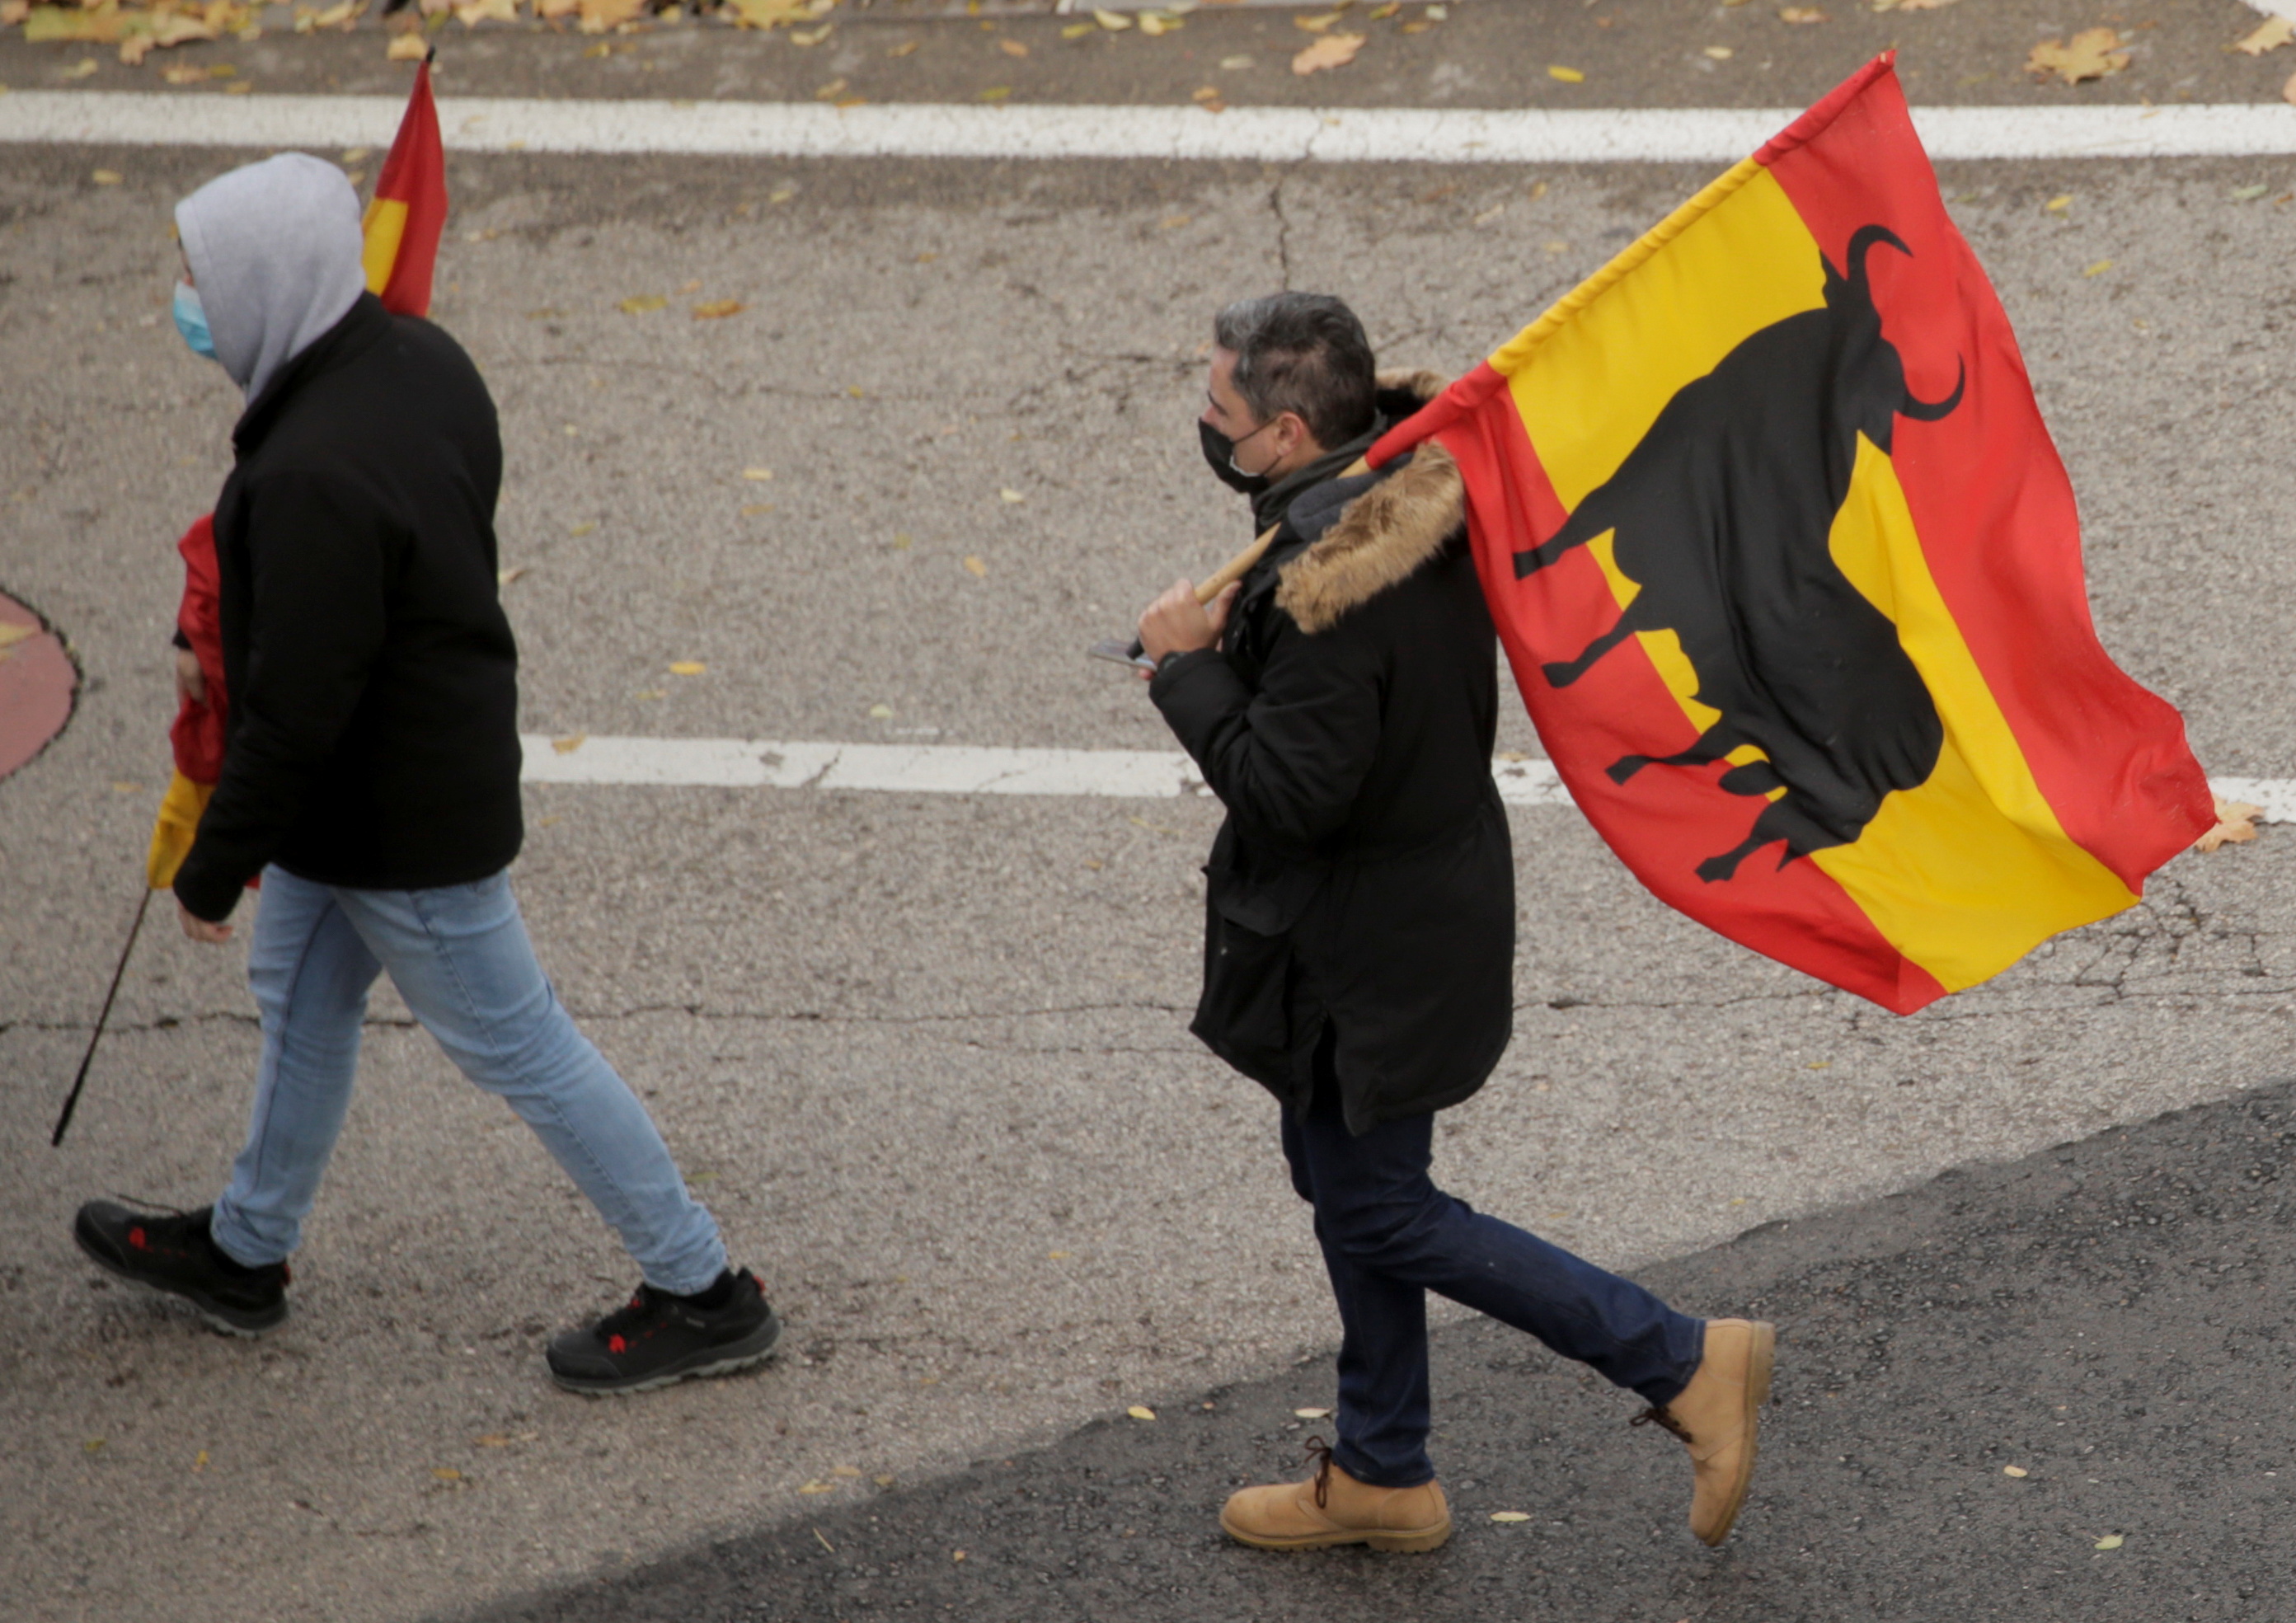 People carry flags during a protest against the proposed changes to anti-terrorism and gagging laws, which police officers say will undermine their authority and jeopardise the safety of citizens, in Madrid, Spain, November 27, 2021. REUTERS/Javier Barbancho